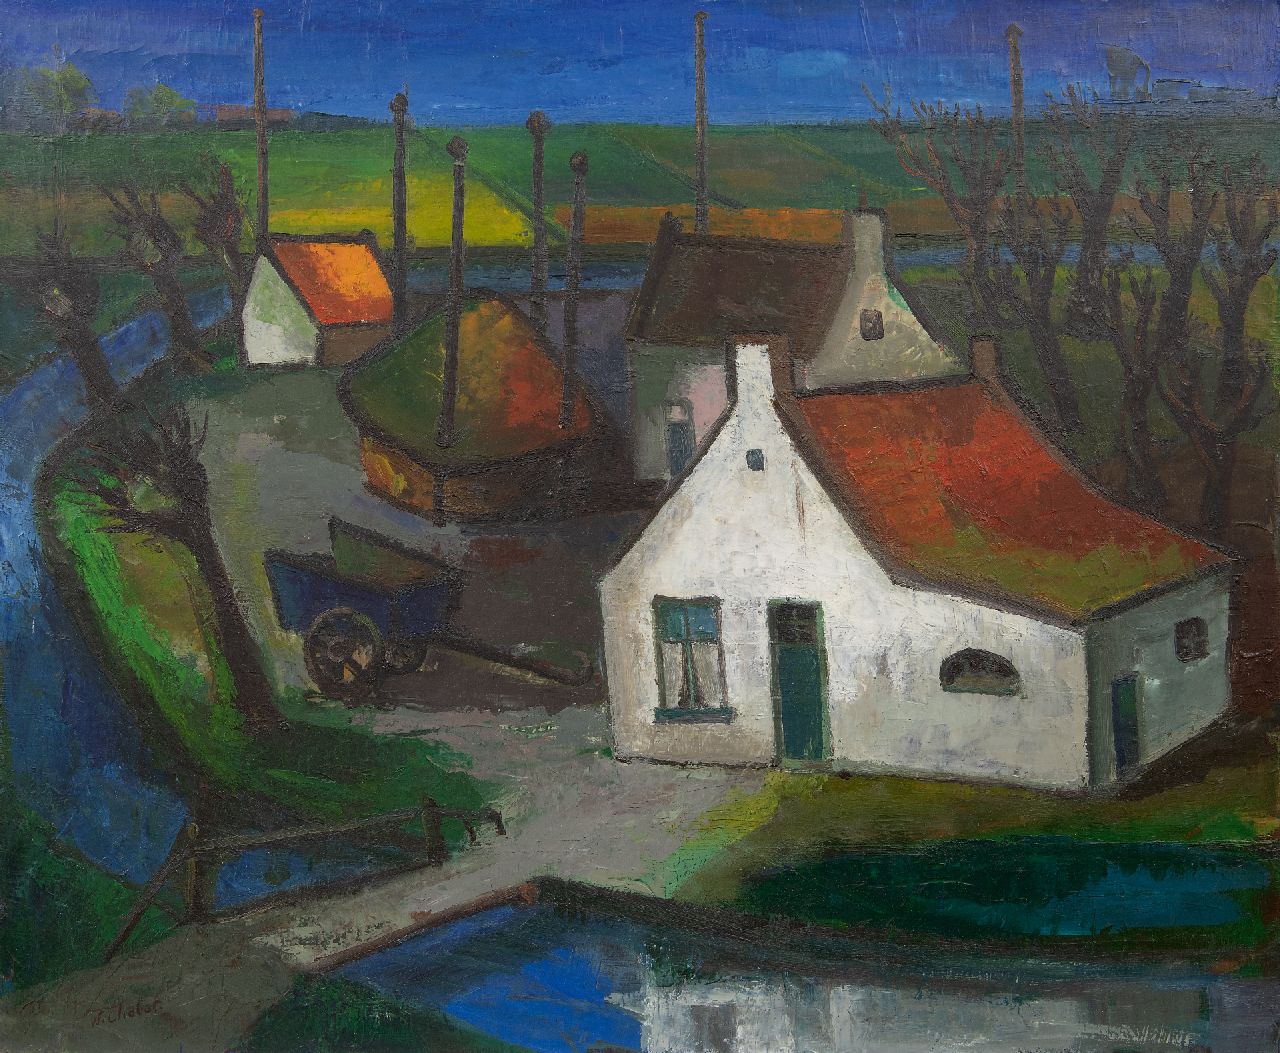 Chabot W.  | Willem 'Wim' Chabot, Farmhouse, oil on canvas 70.3 x 85.1 cm, signed l.l. and dated oktober '70